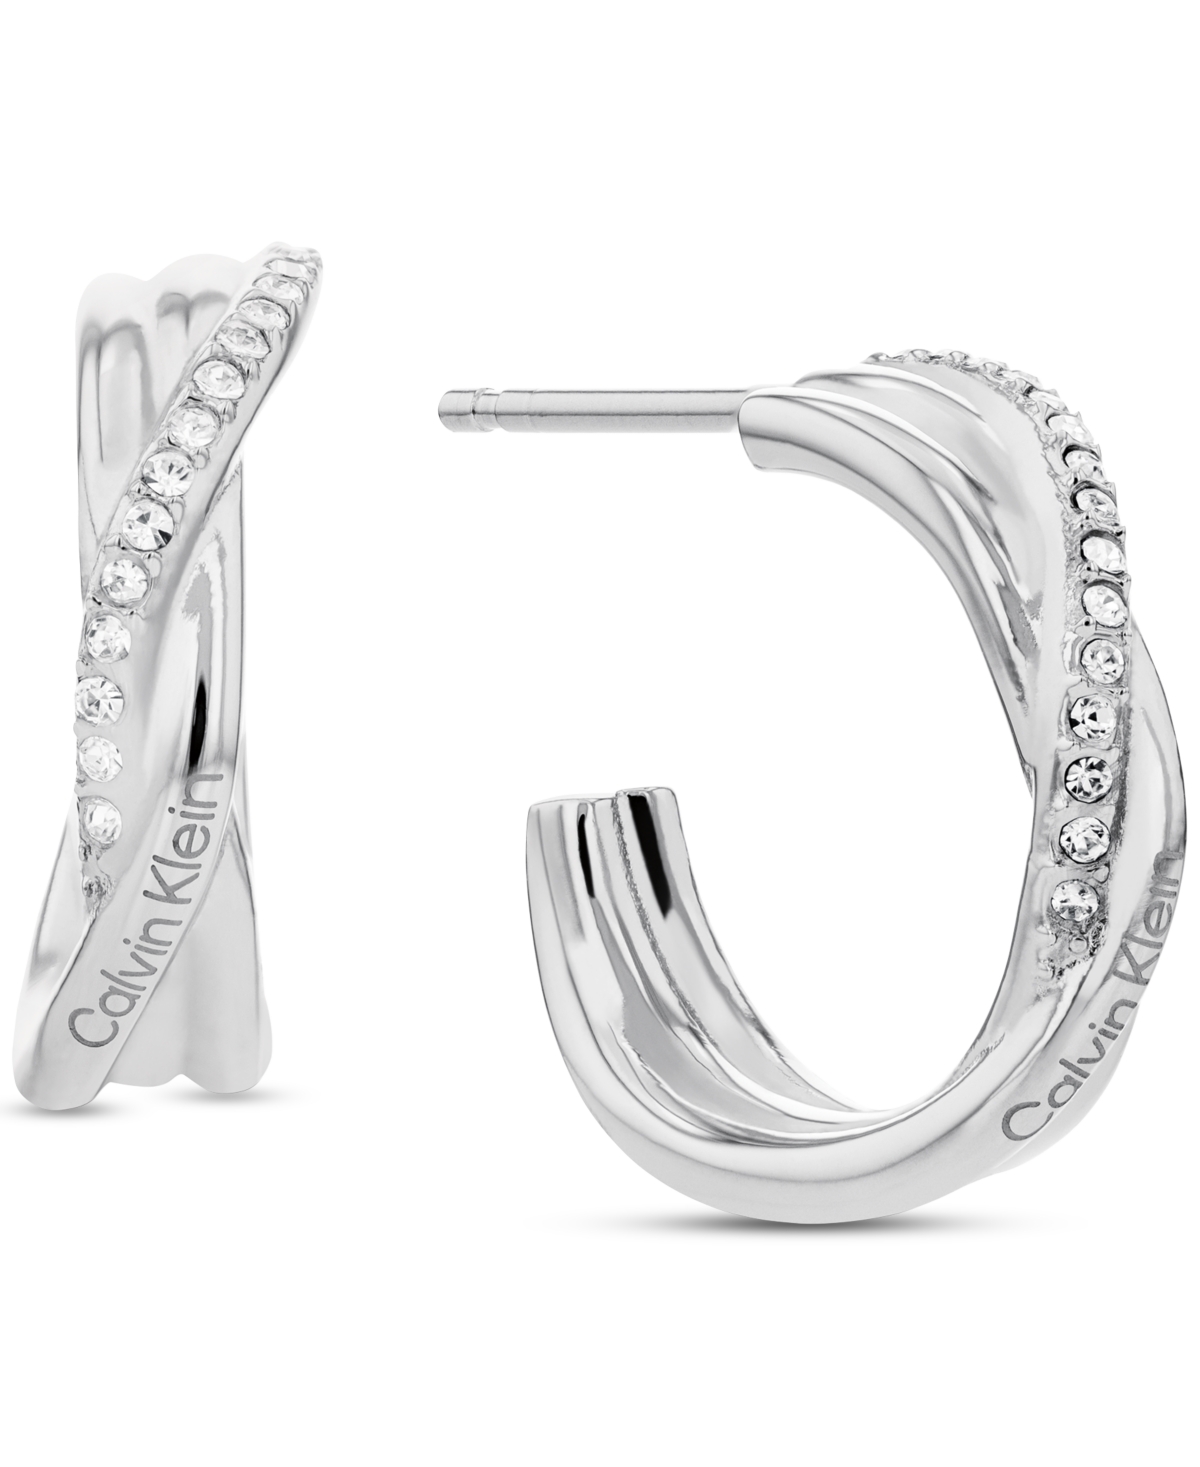 Stainless Steel Small Pave Crossover C-Hoop Earrings, 0.6" - Silver